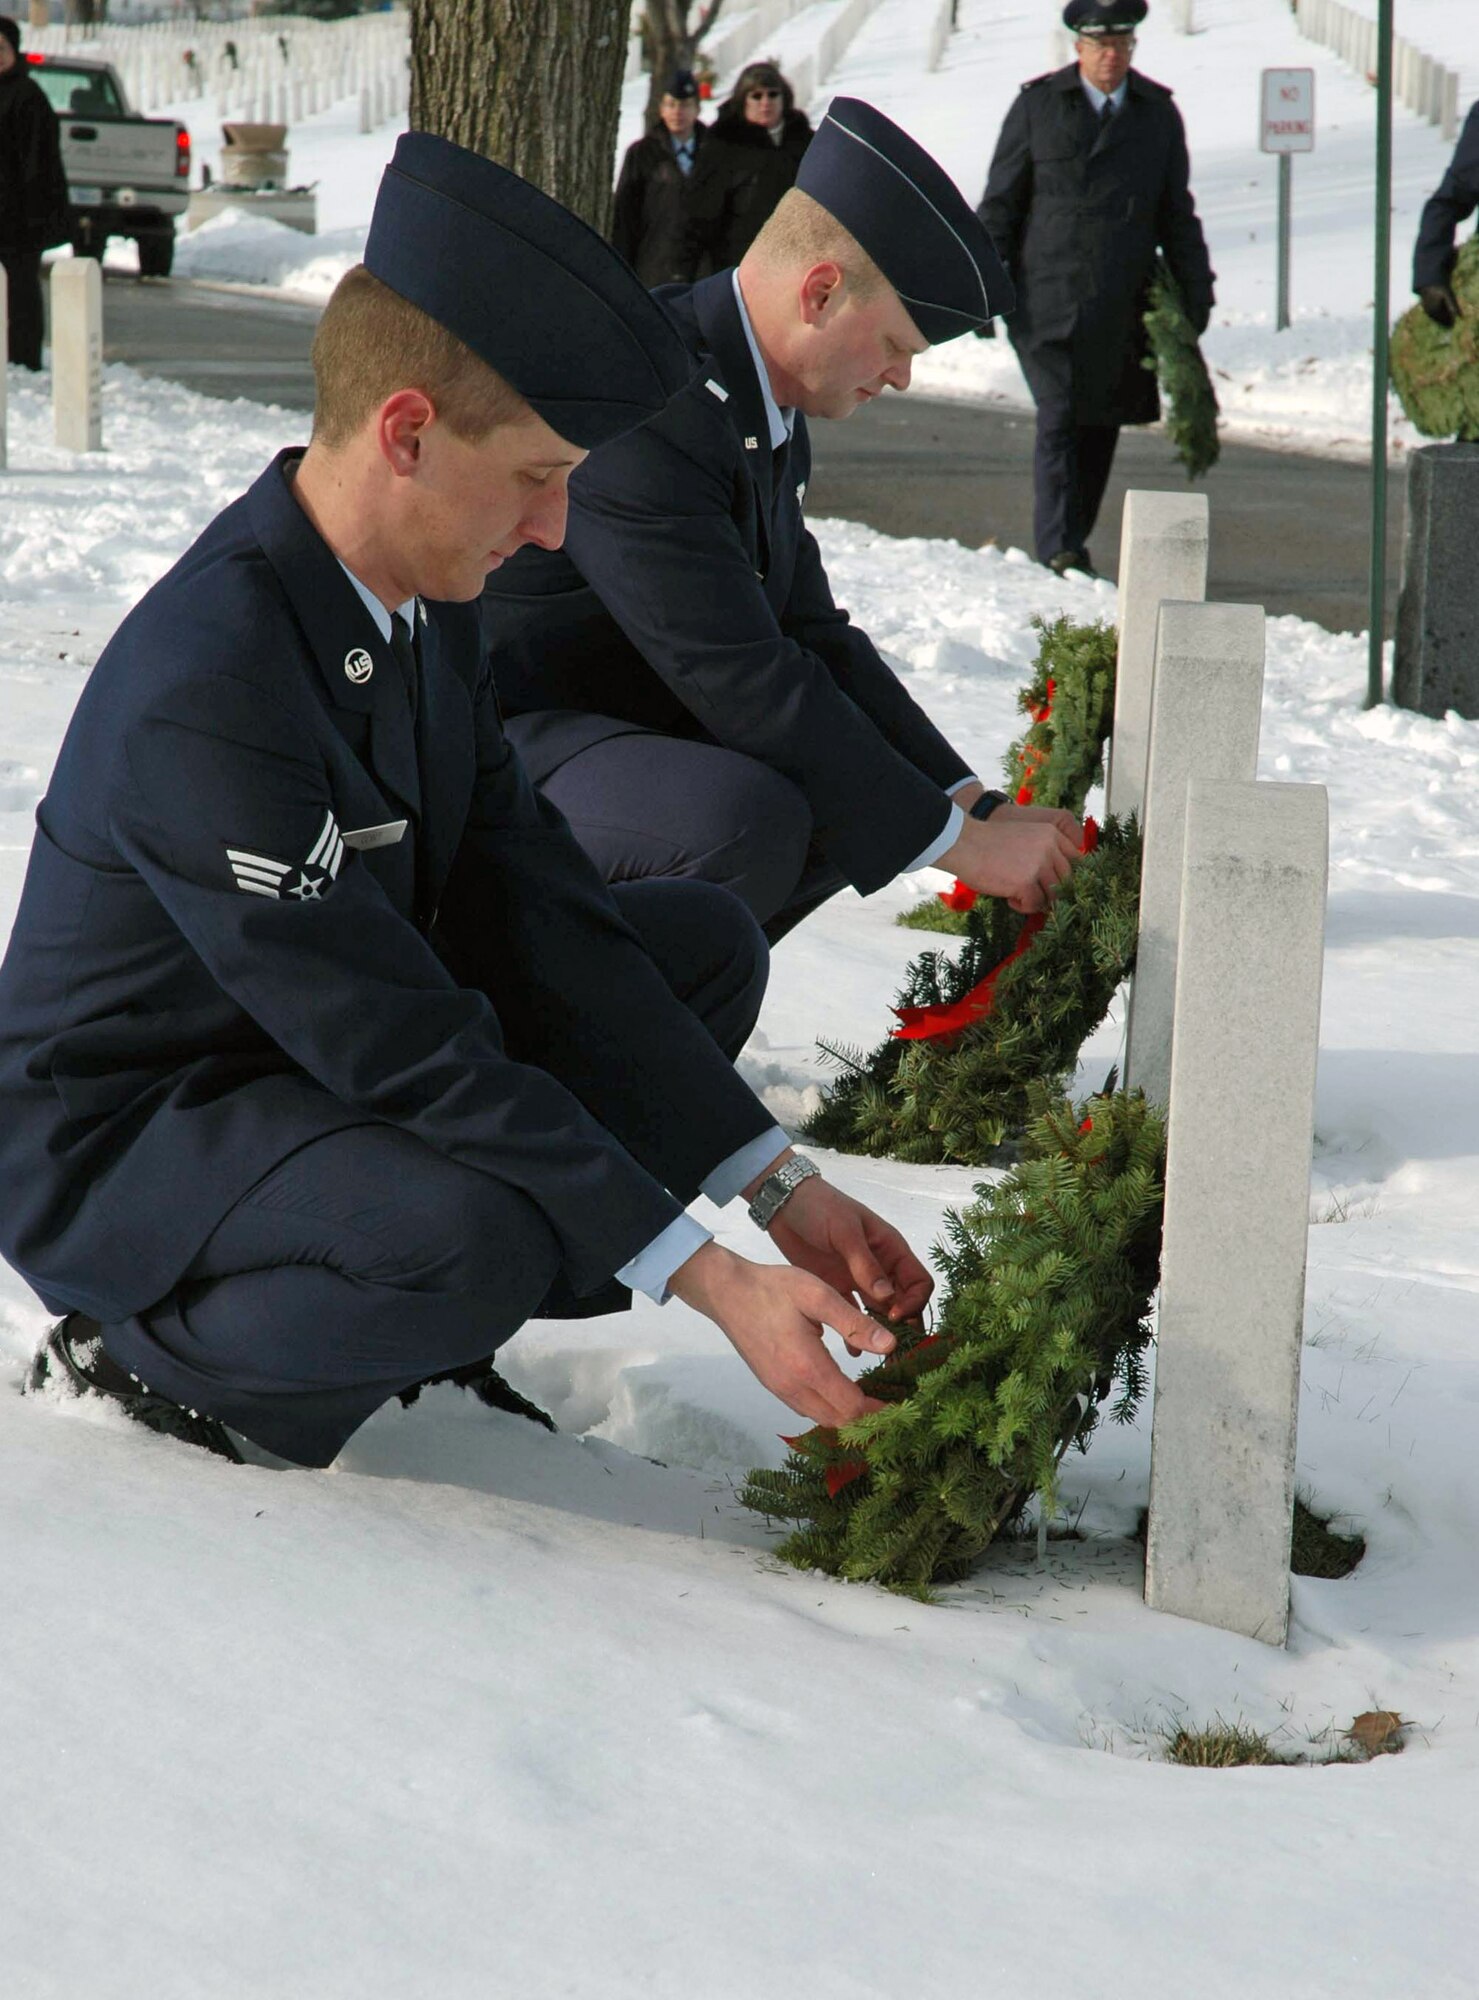 Senior Airman Justin Gort (left) and 1st Lt. Brandon Schrader lay wreaths Dec. 13 at Fort Snelling National Cemetery, Minn. The two are assigned to the 96th Airlift Squadron from the 96th Airlift Squadron from the Minneapolis-St. Paul Joint Reserve Station in Minnesota. (U.S. Air Force photo/Capt. S.J. Brown) 
